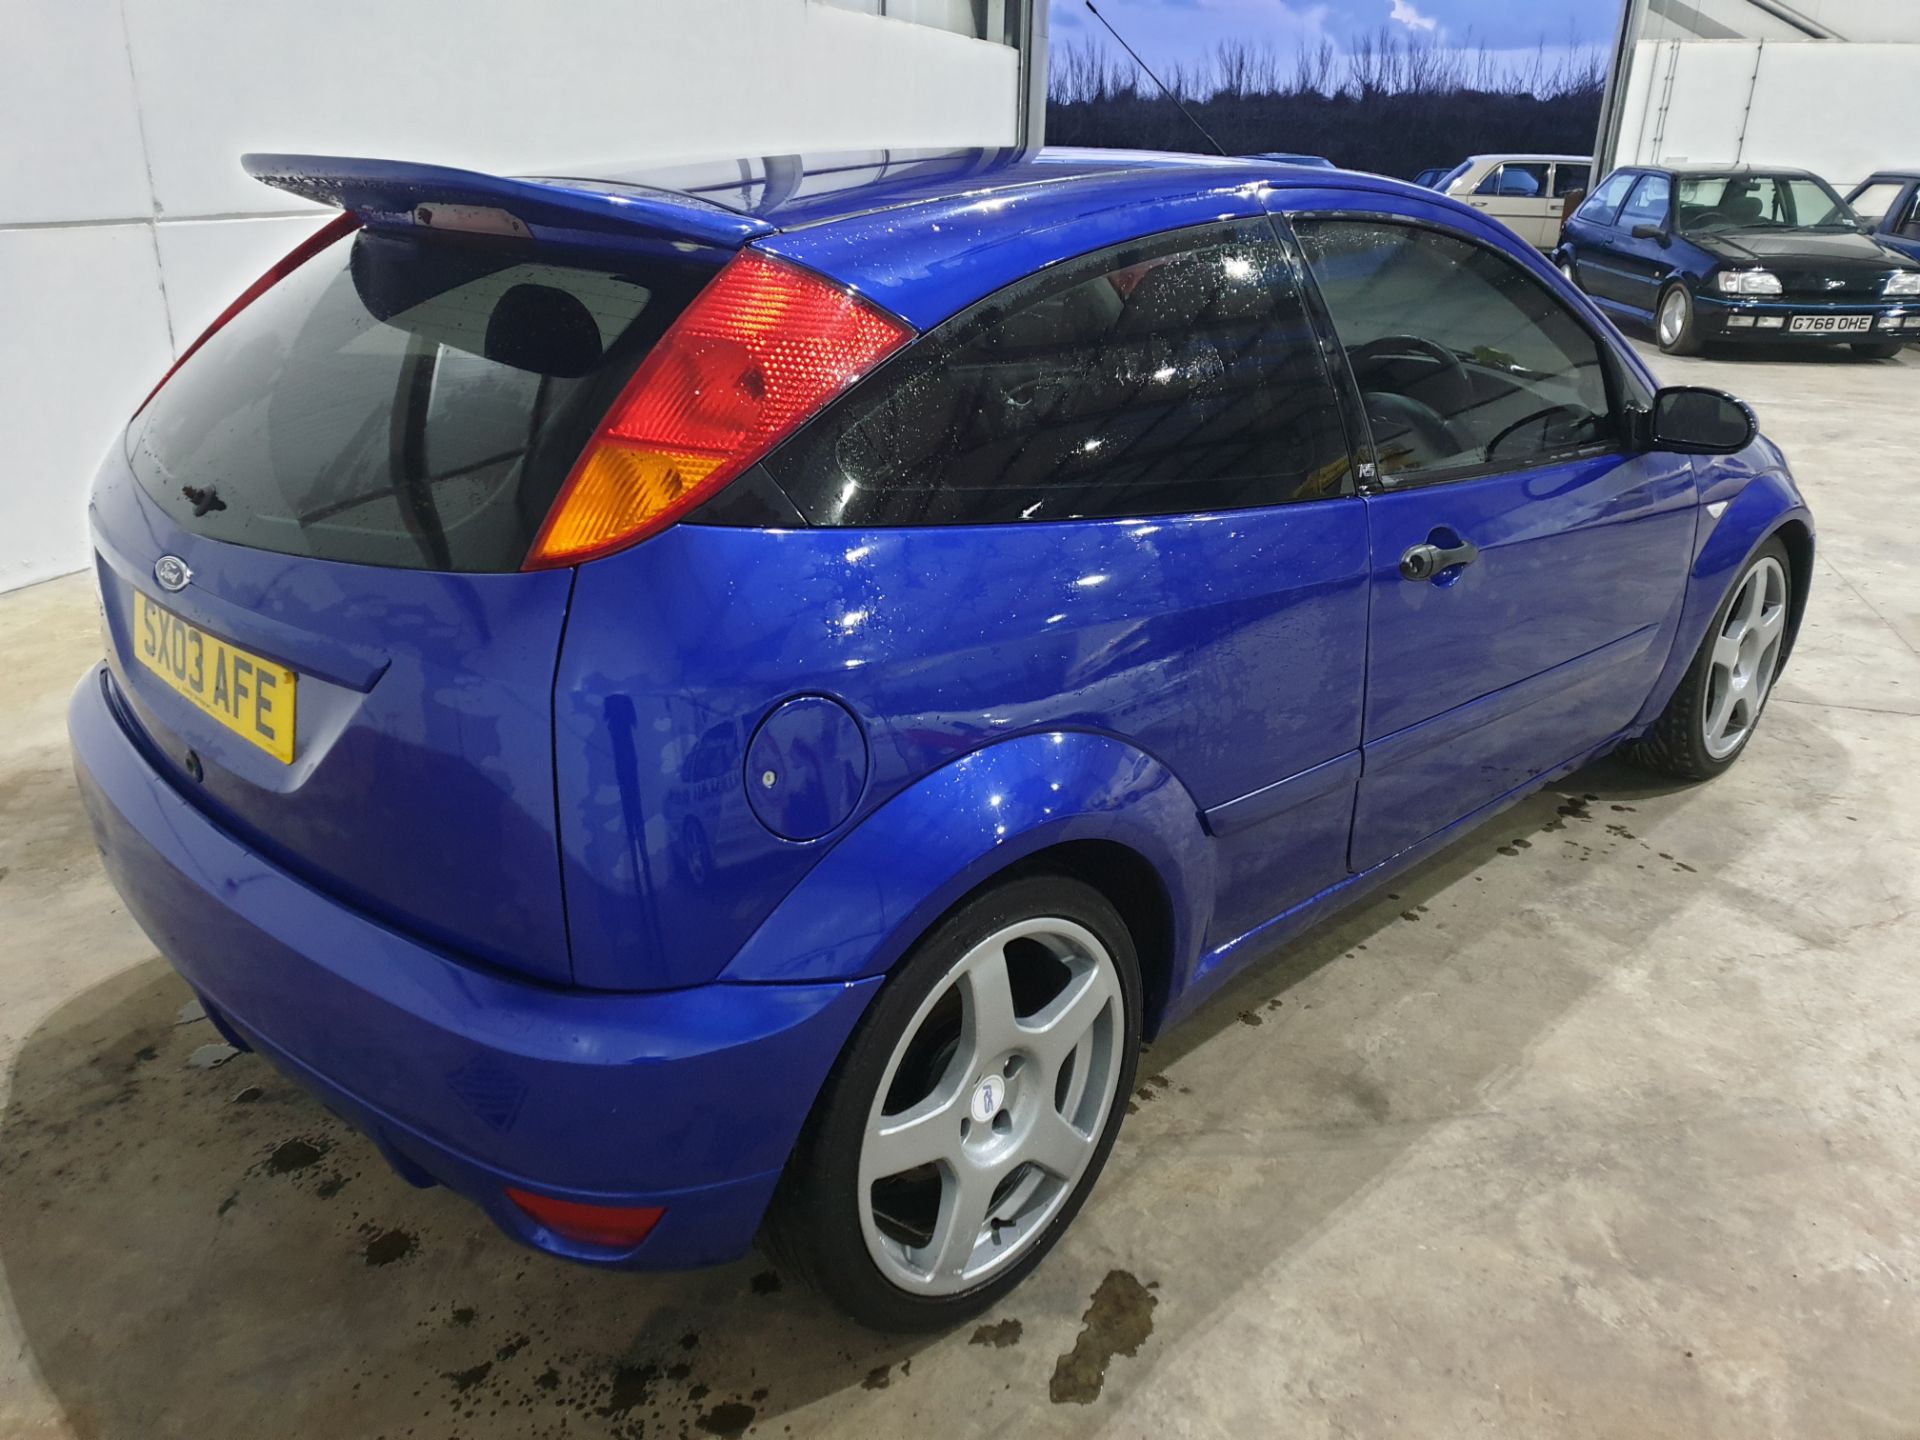 Ford Focus RS Mk1 - Image 3 of 13